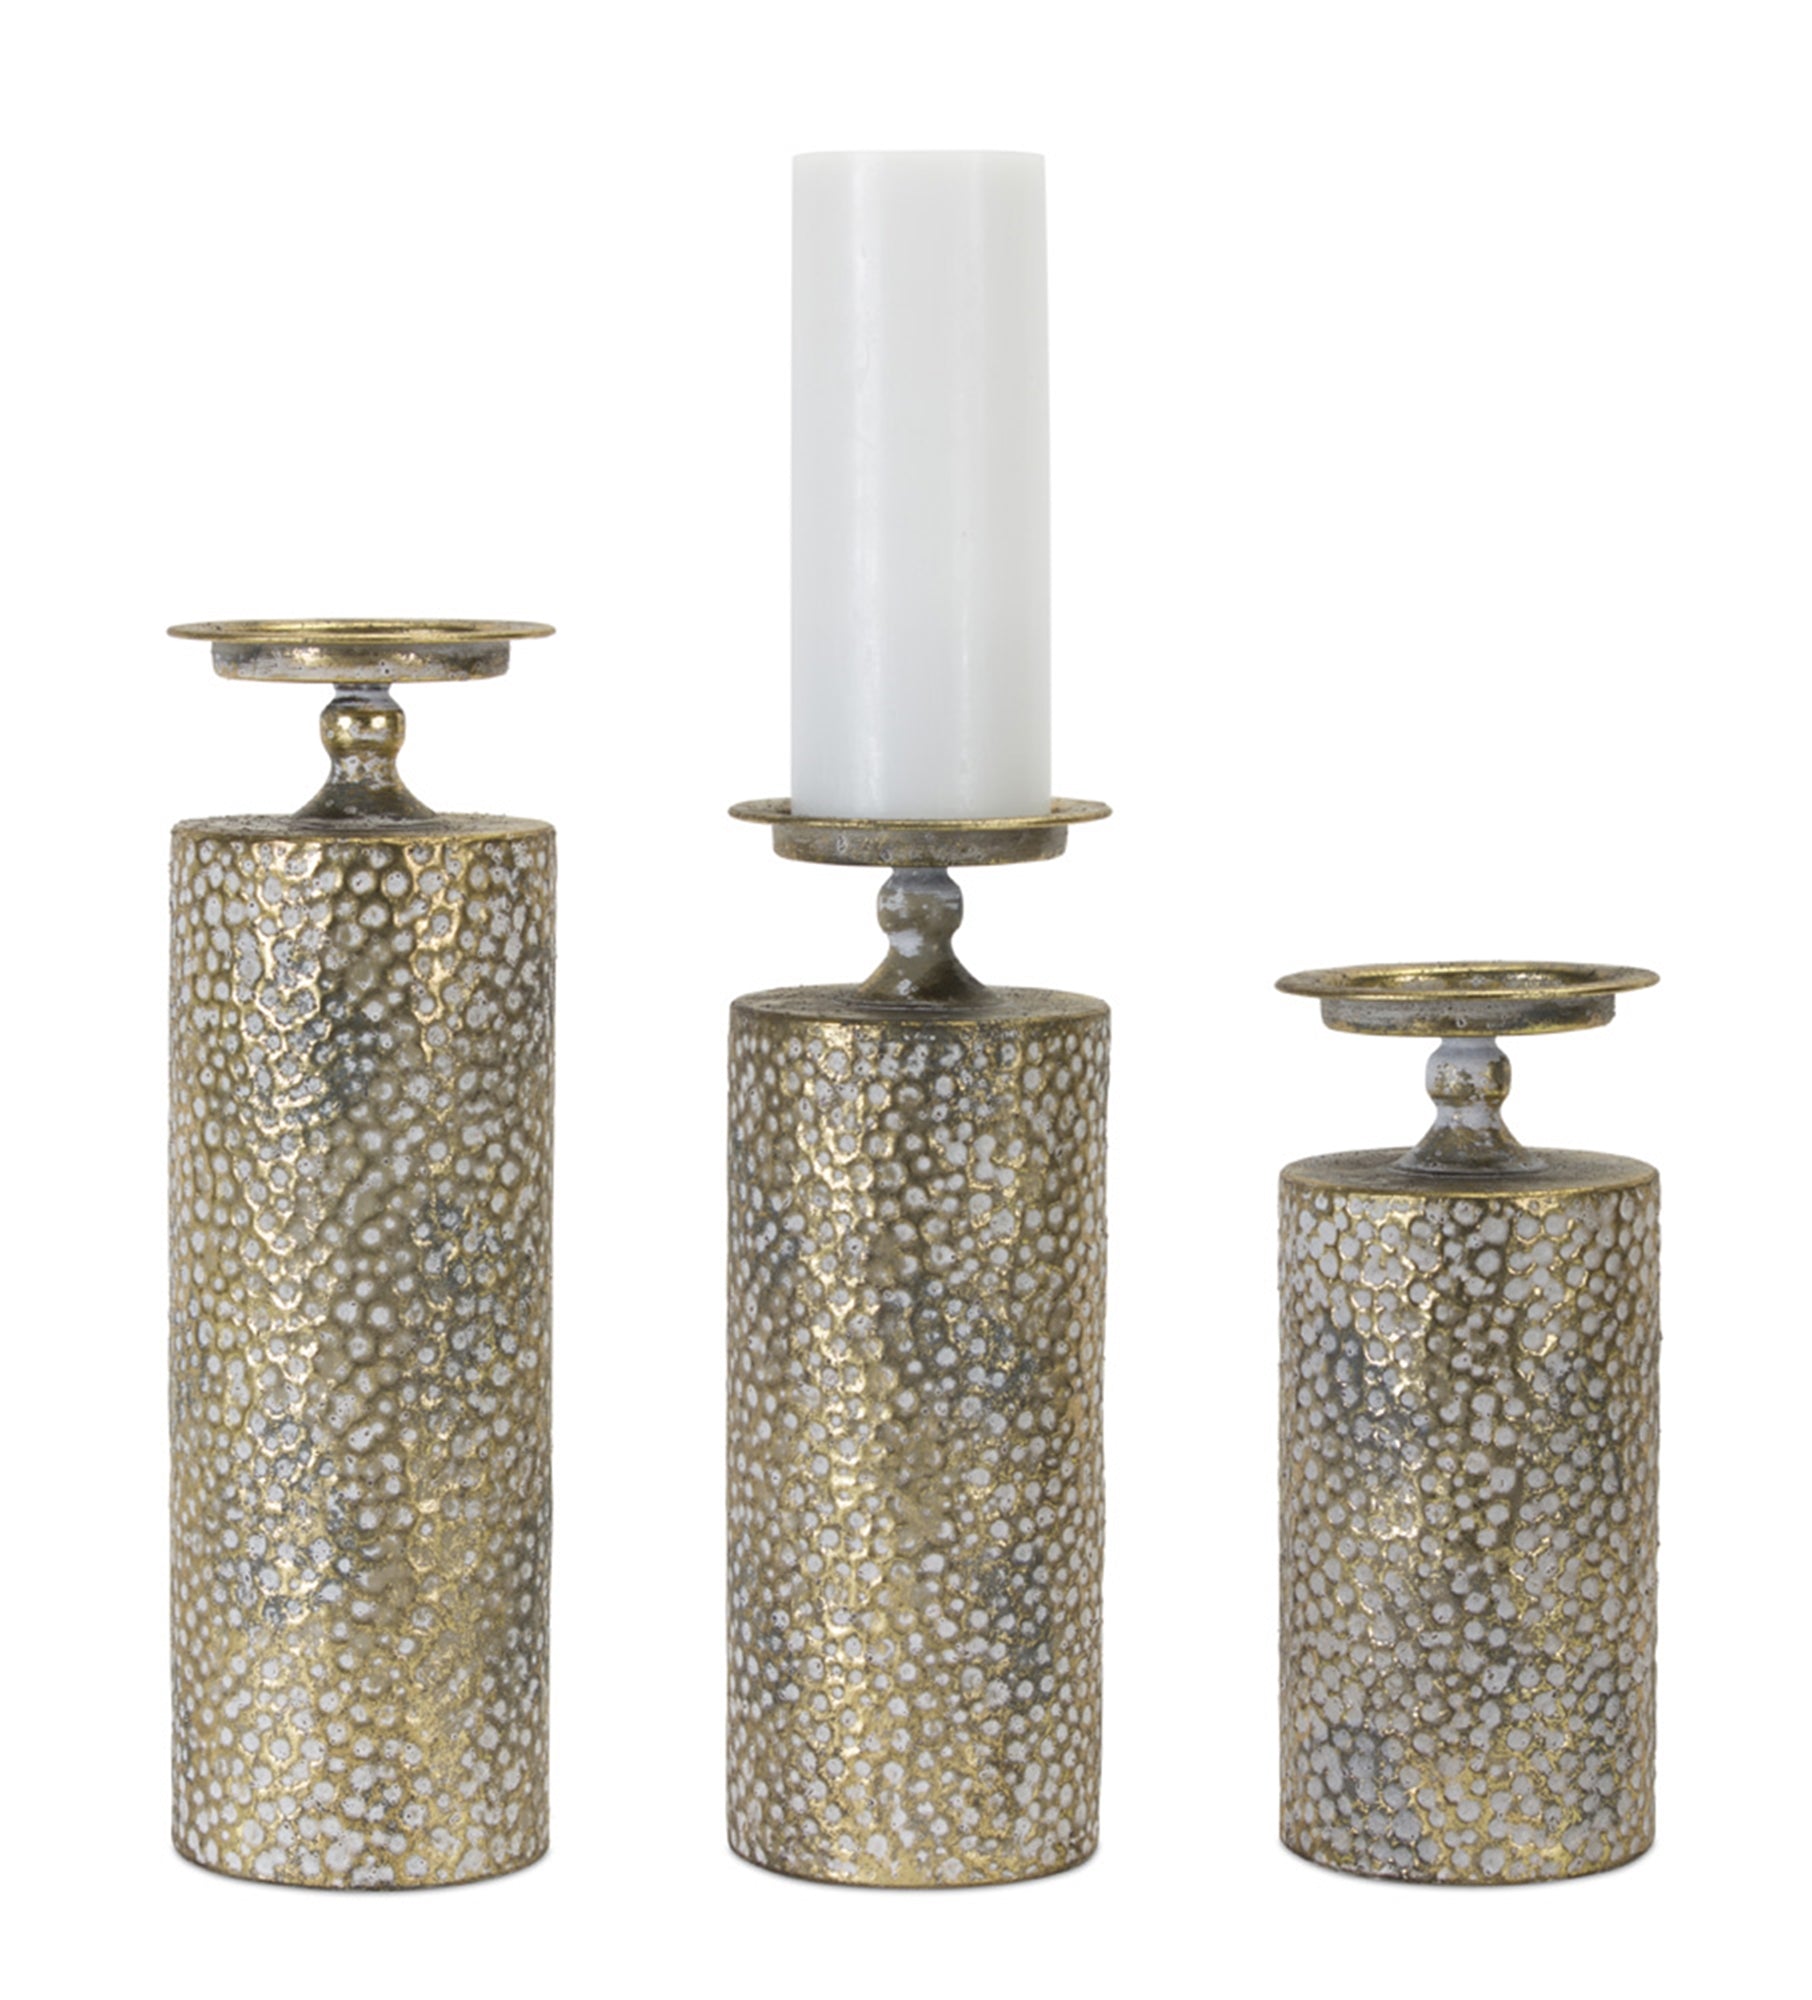 Fern Hill Hammered Metal Candleholders (S/3) (5635810328733)